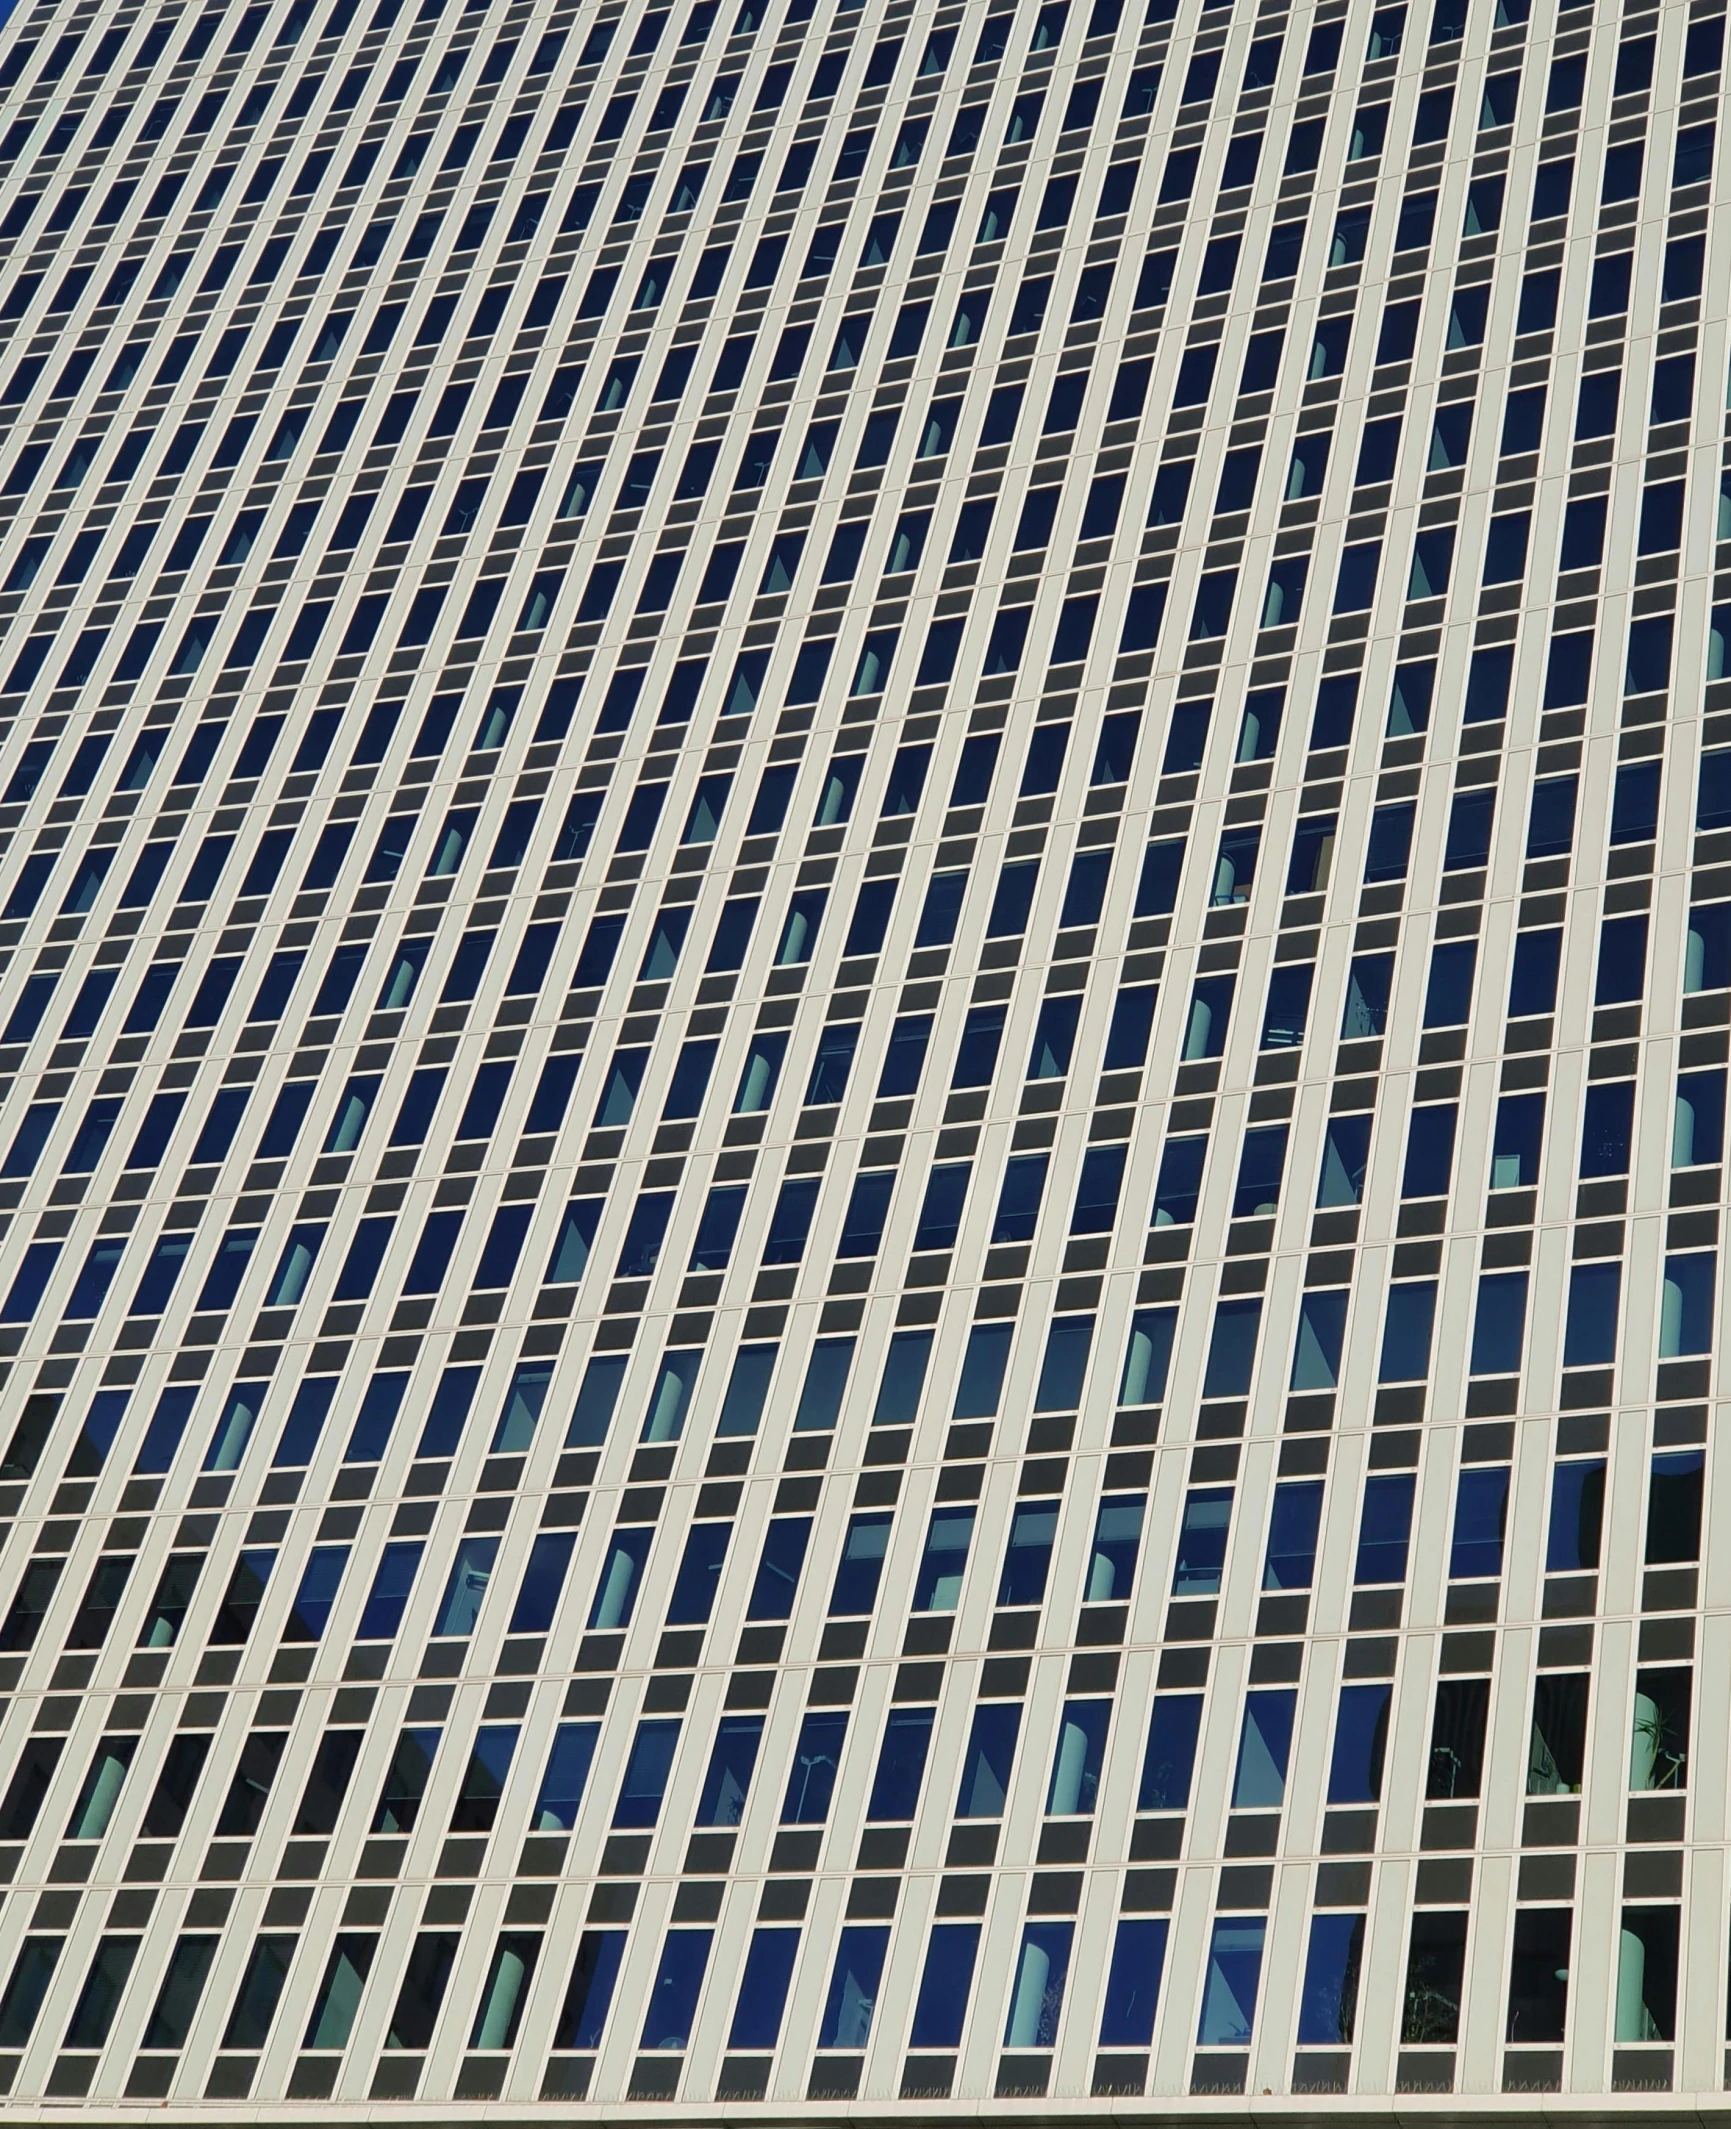 a very tall building with lots of windows, inspired by Andreas Gursky, postminimalism, look at all that detail, hoog detail, 9 / 1 1, square lines